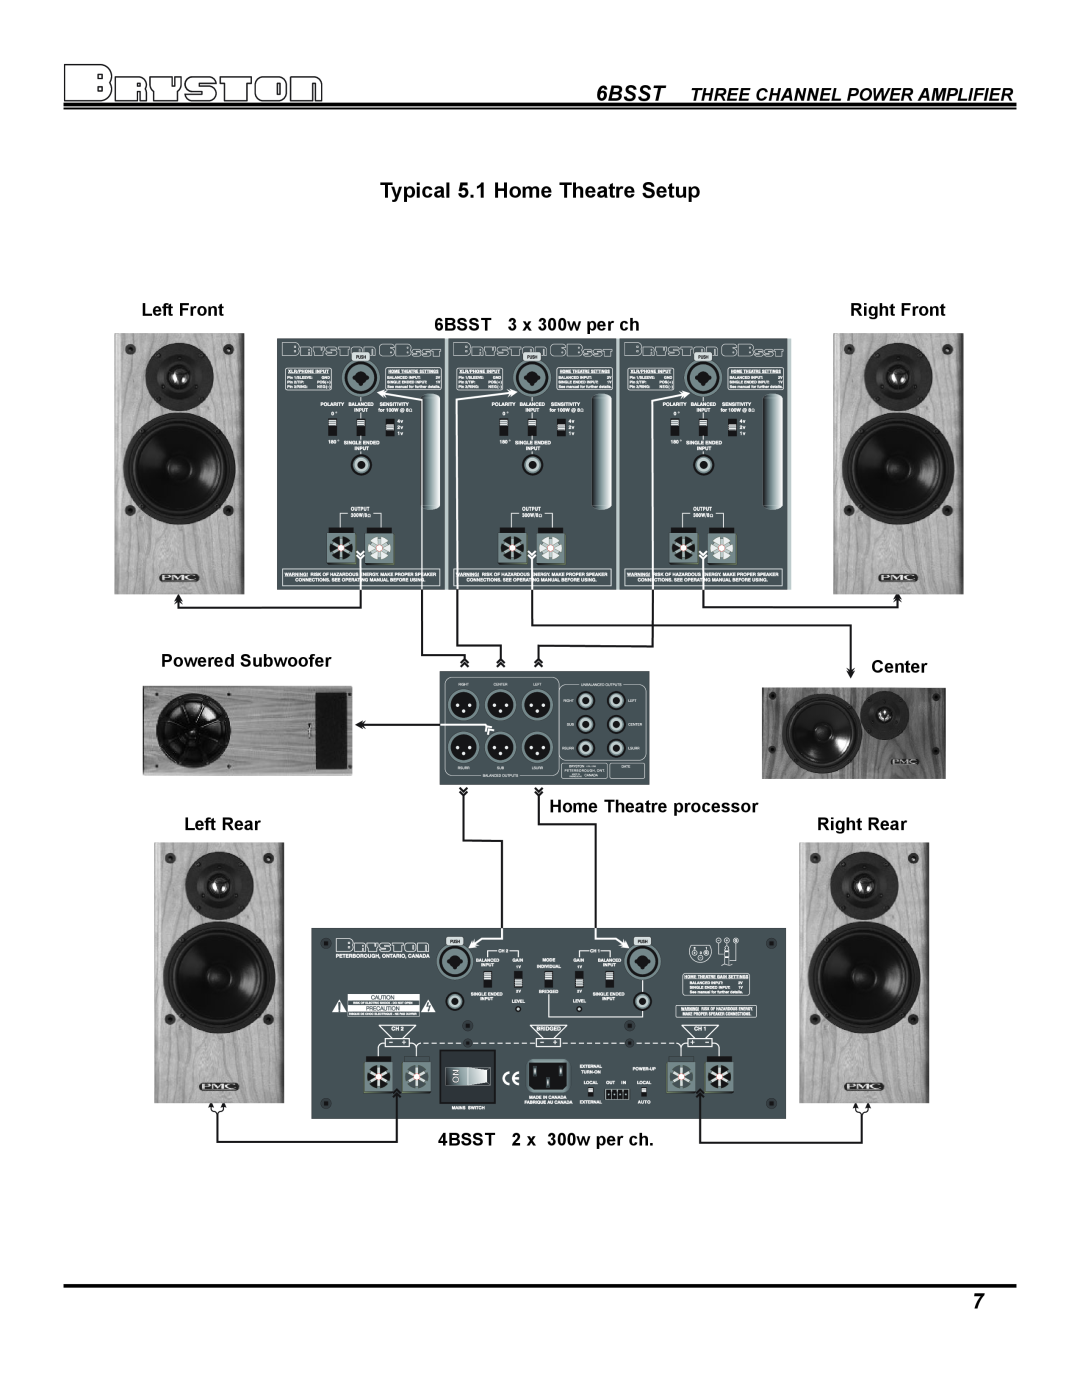 Bryston SST Series Amplifiers owner manual Typical 5.1 Home Theatre Setup, 6BSST THREE CHANNEL POWER AMPLIFIER 